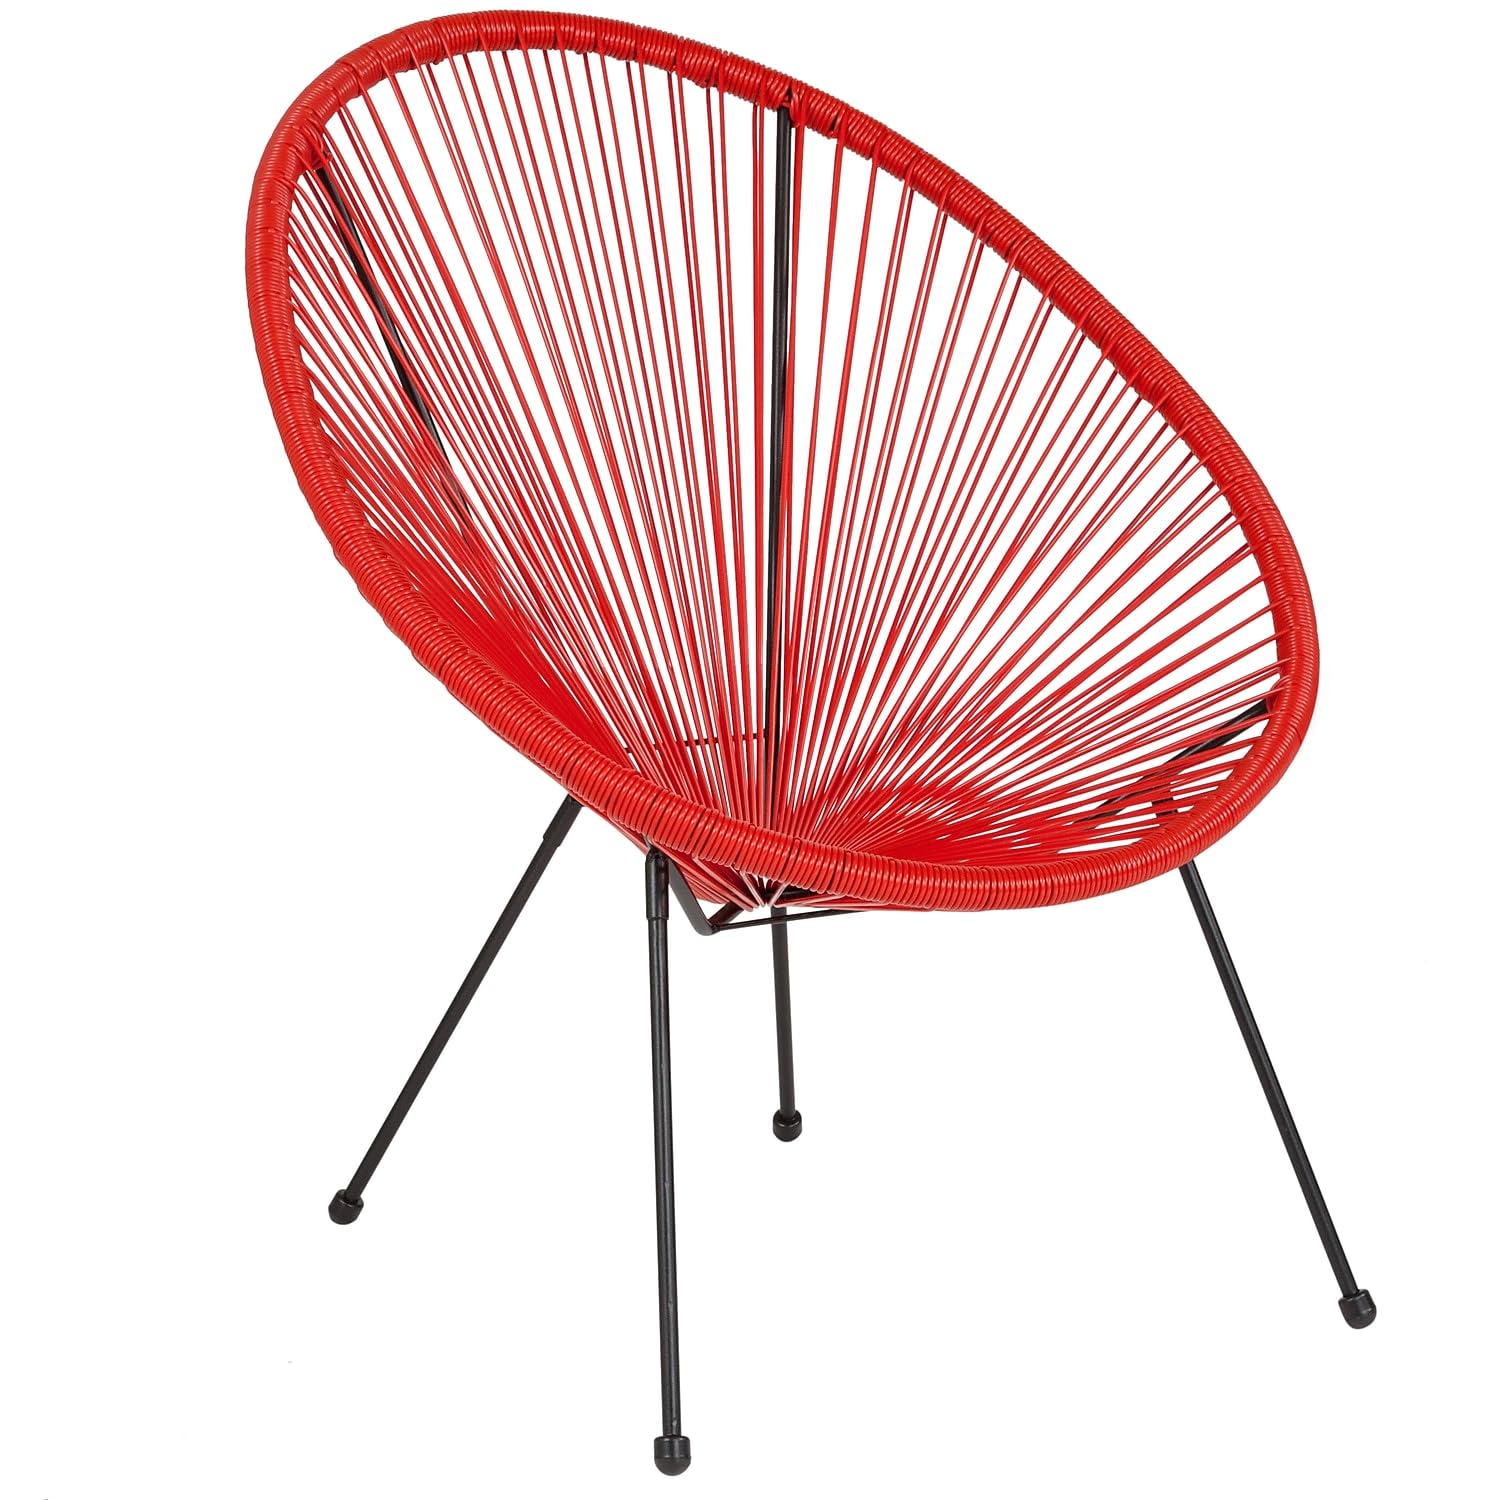 Flash Furniture TLH-094-RED-GG Valencia Oval Comfort Series Take Ten Red Rattan Lounge Chair, 35.25 x 29 x 30.25 in.